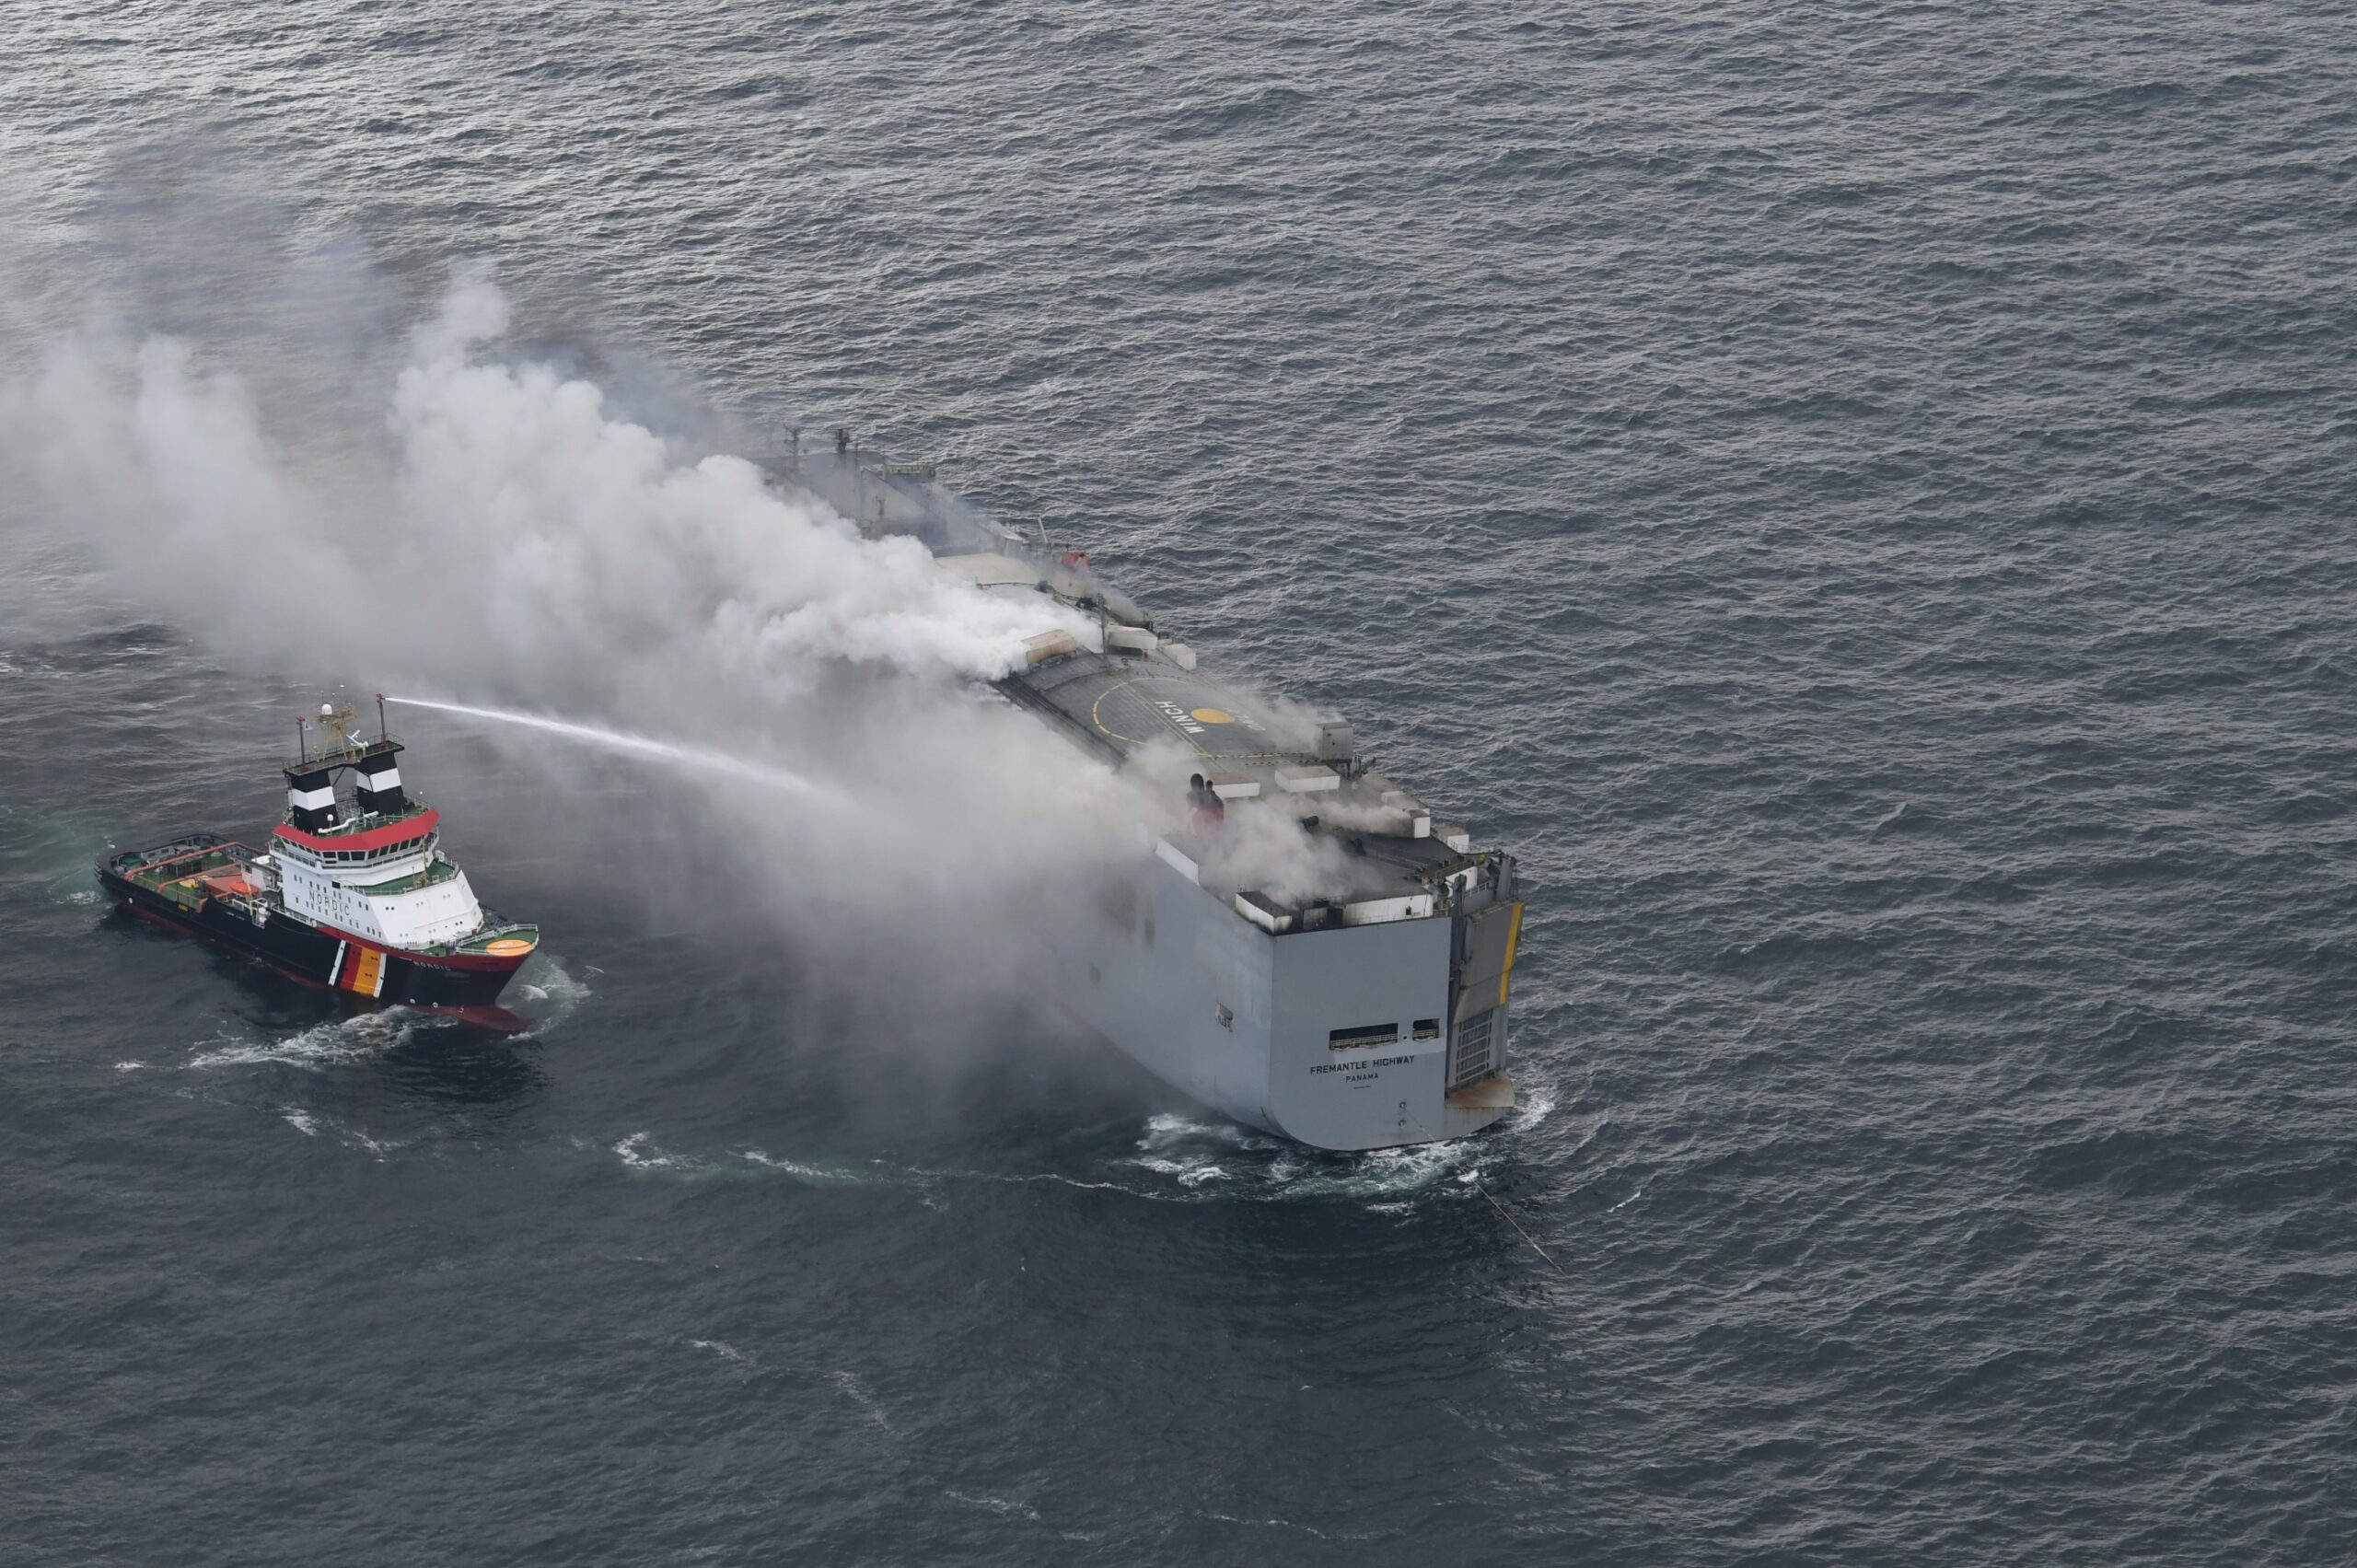 Car transport ship fire could 'burn for days' in North Sea